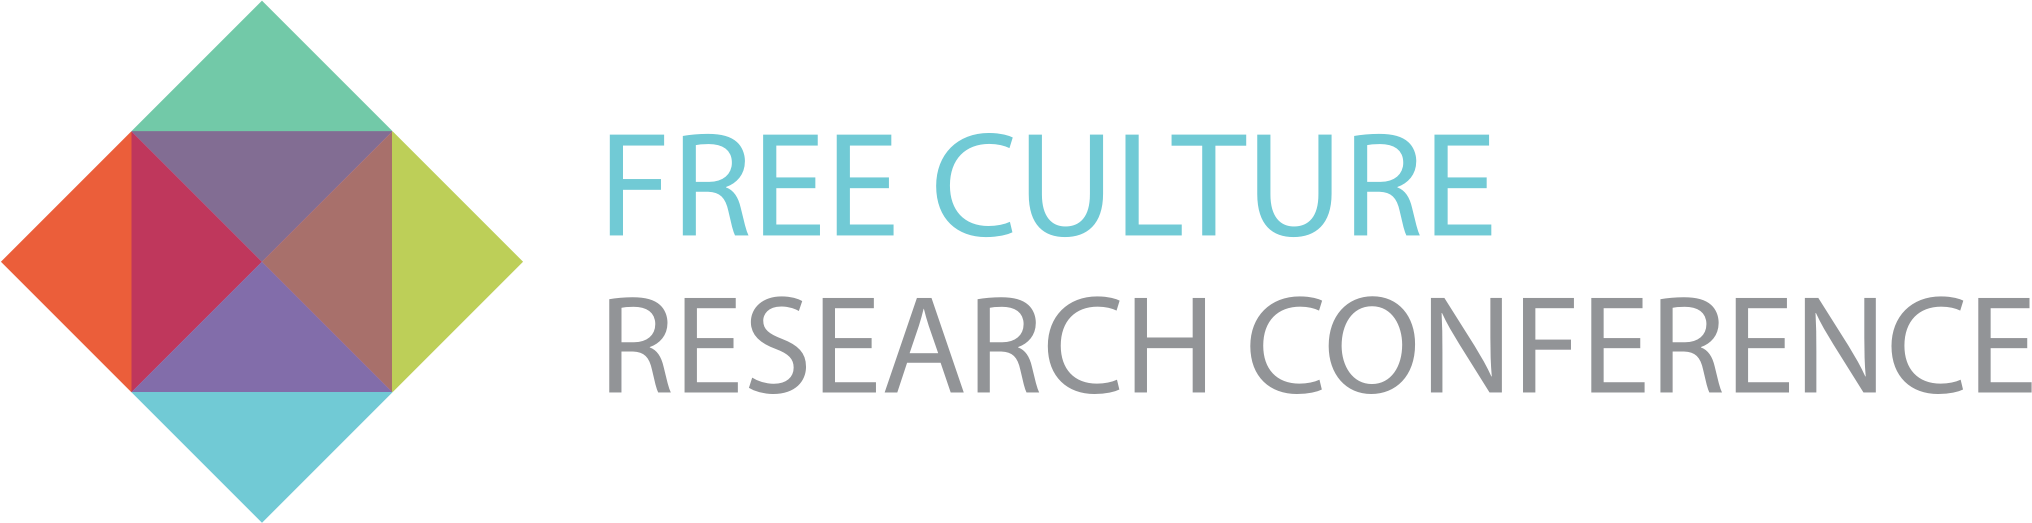 Free Culture Research Conference Logo By Hank0071